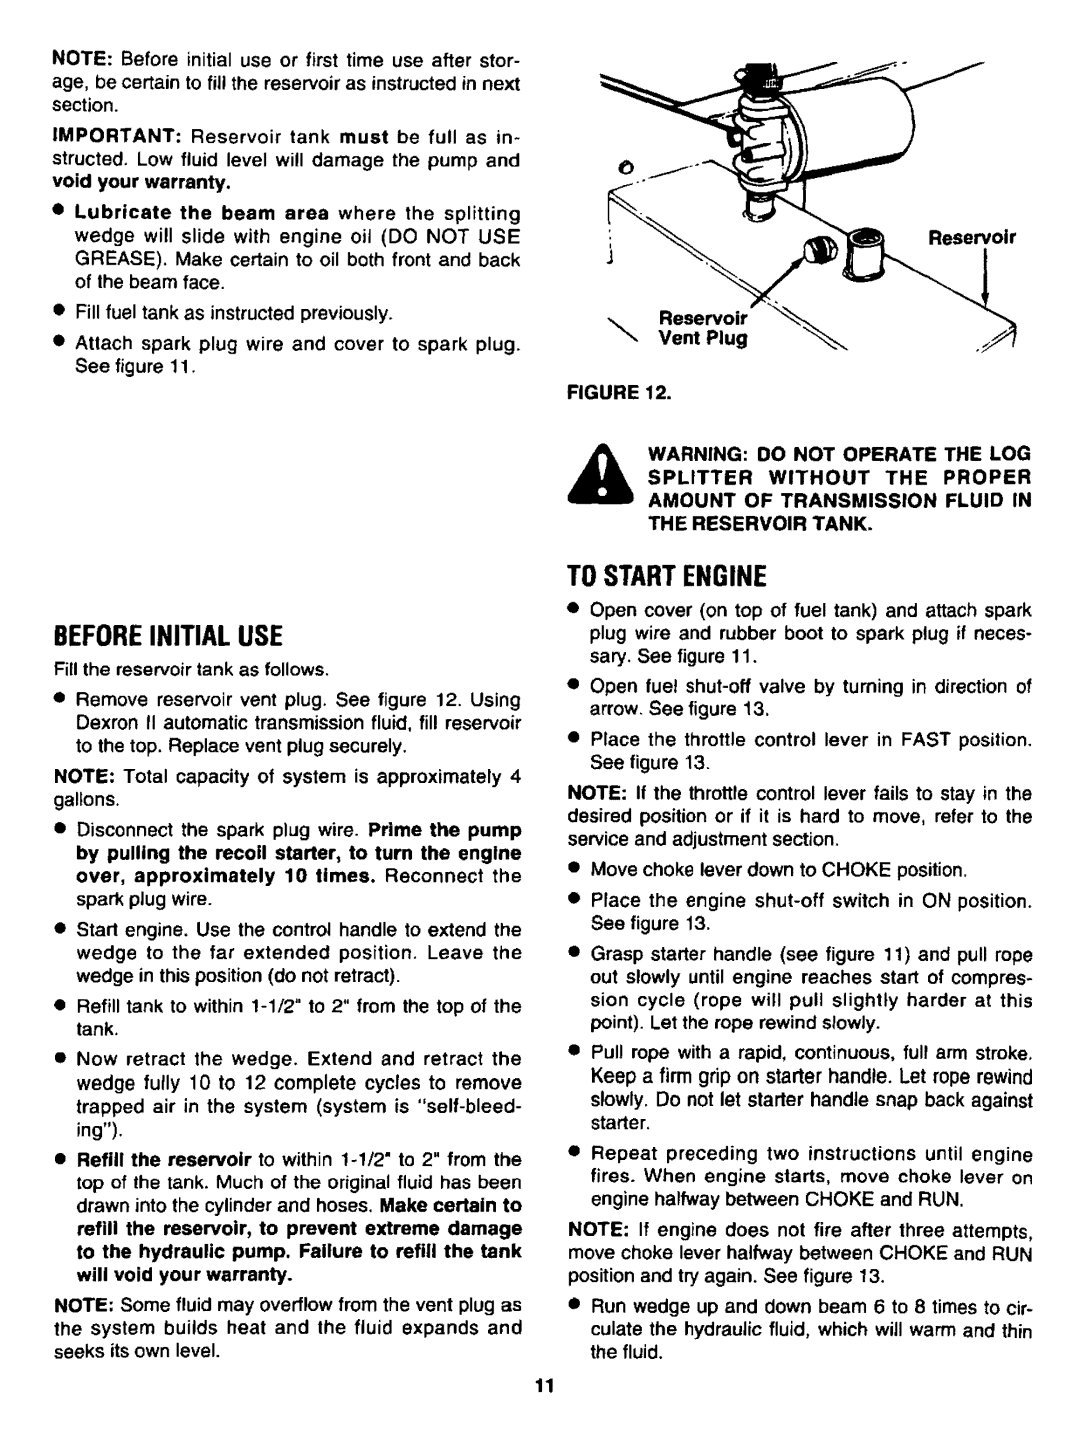 Sears 247.34625 owner manual Tostartengine, Beforeinitial Use 